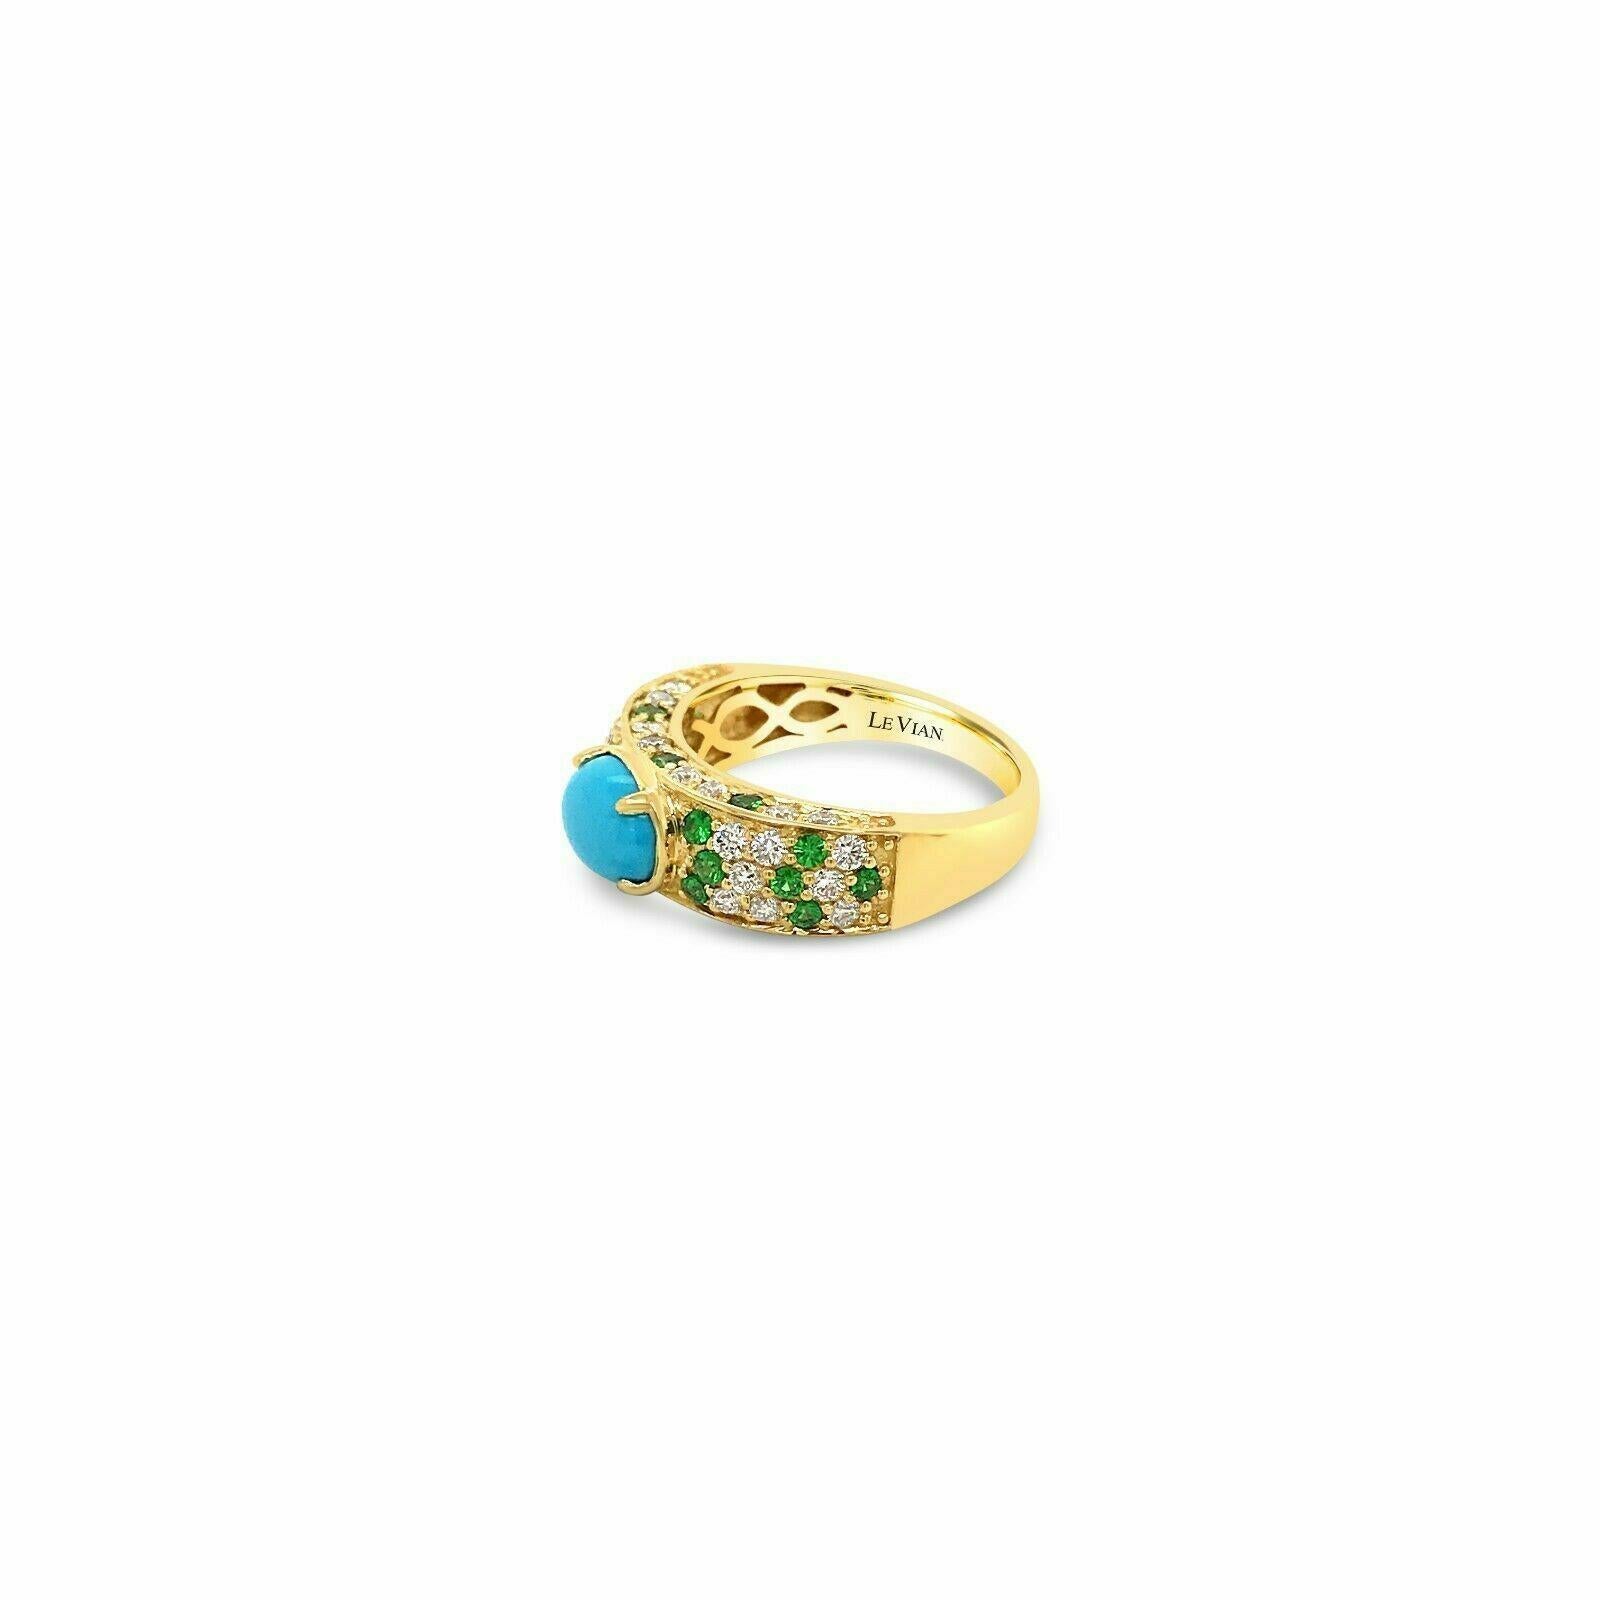 Carlo Viani Ring featuring 1 cts. Robins Egg Blue Turquoise™, 1/2 cts. Forest Green Tsavorite™, 5/8 cts. Vanilla Diamonds® set in 14K Honey Gold™